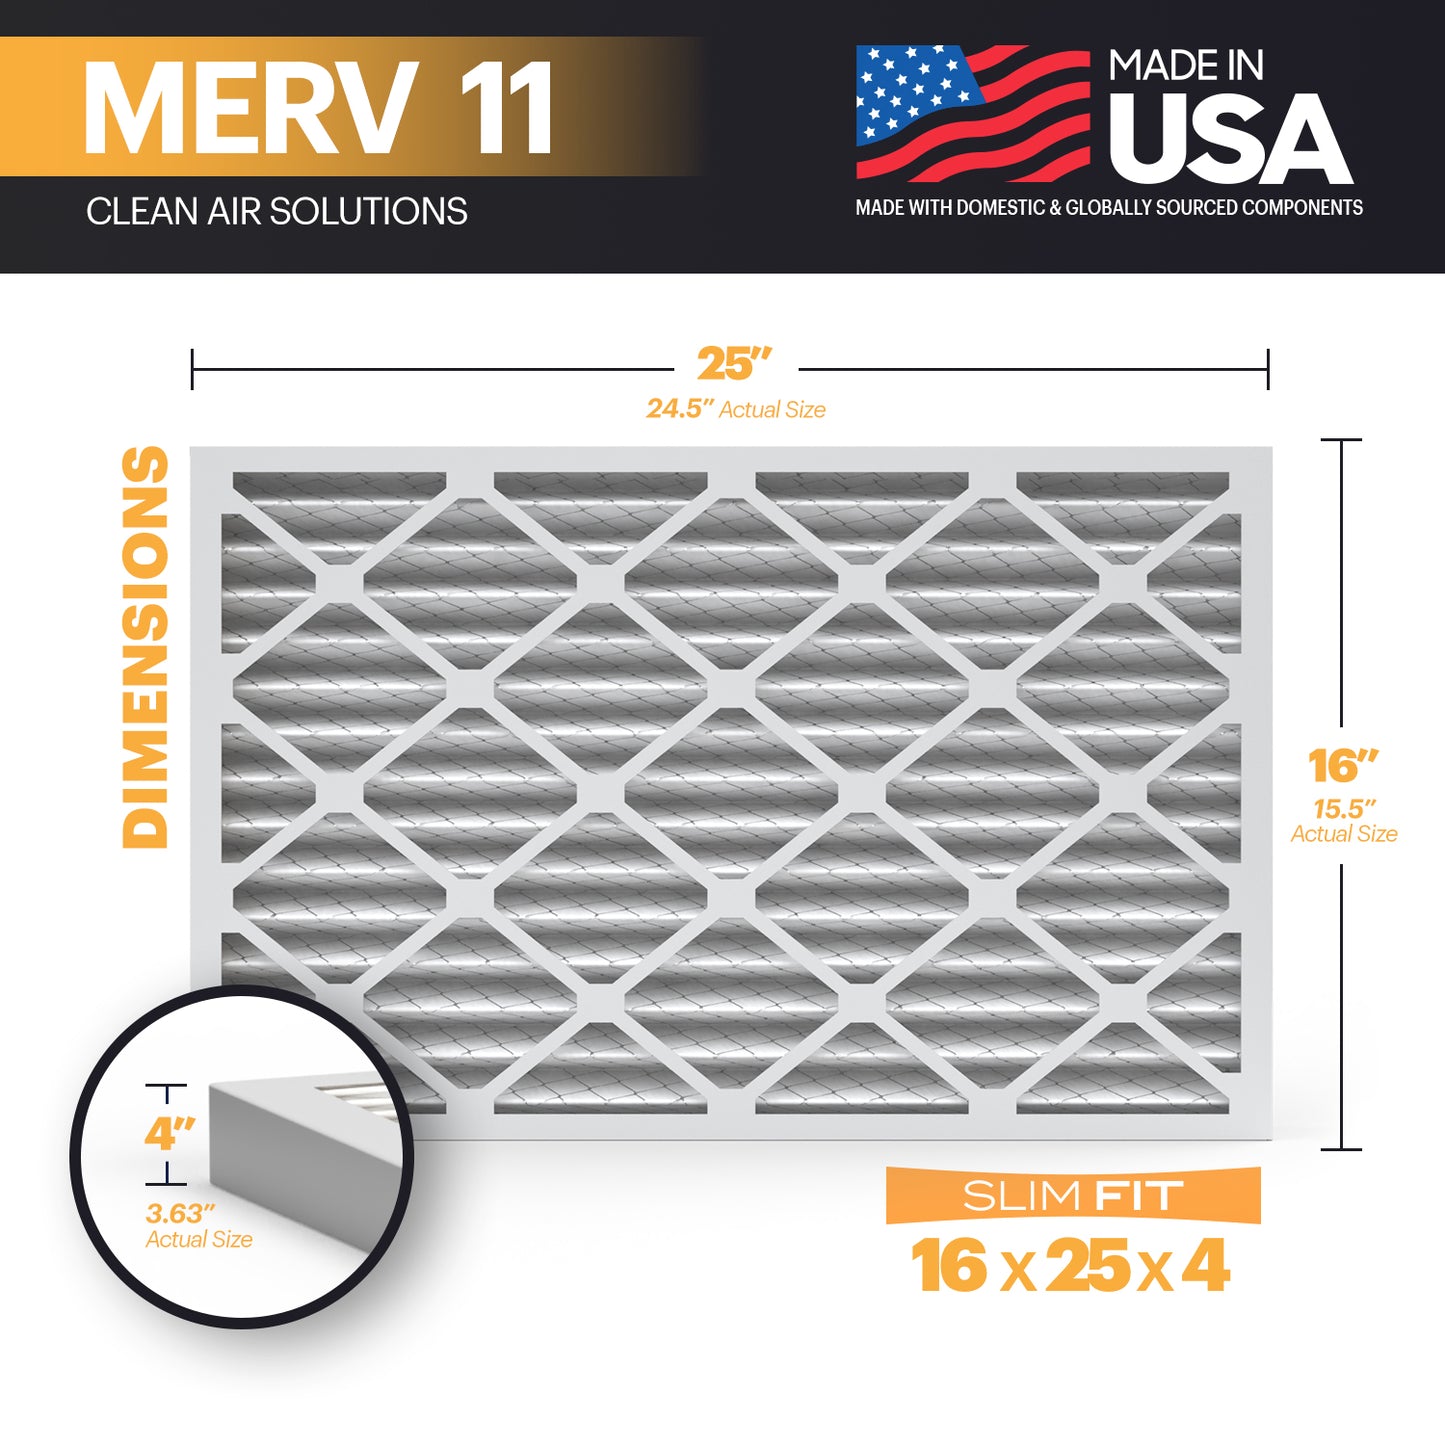 BNX TruFilter 16x25x4 MERV 11 Pleated Air Filter – Made in USA (2-Pack) (Slim Fit)